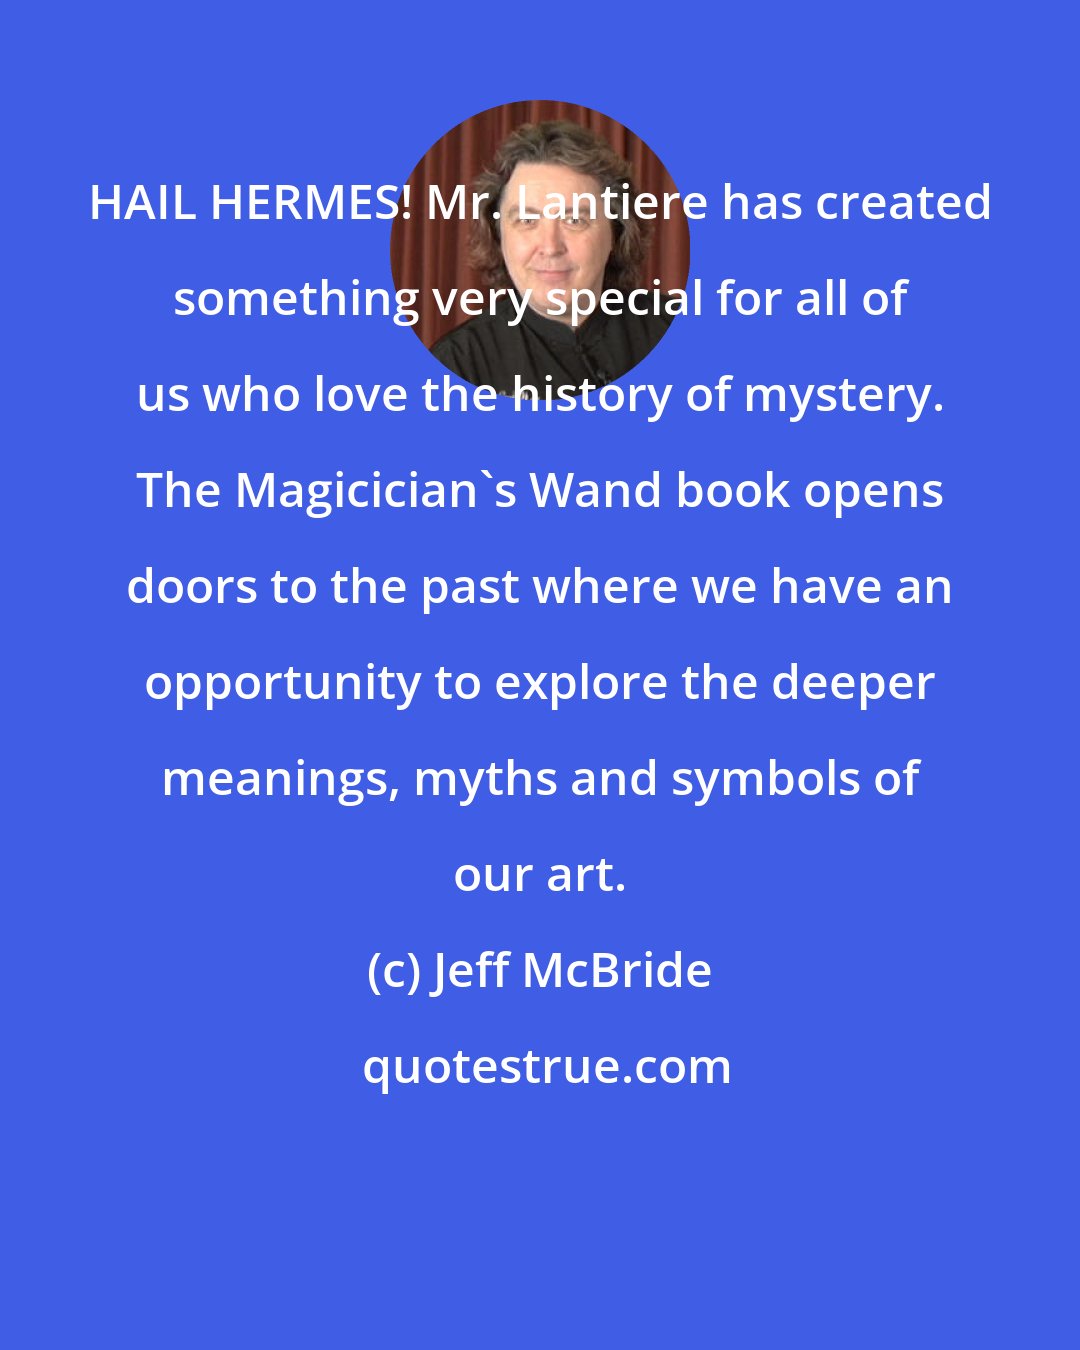 Jeff McBride: HAIL HERMES! Mr. Lantiere has created something very special for all of us who love the history of mystery. The Magicician's Wand book opens doors to the past where we have an opportunity to explore the deeper meanings, myths and symbols of our art.